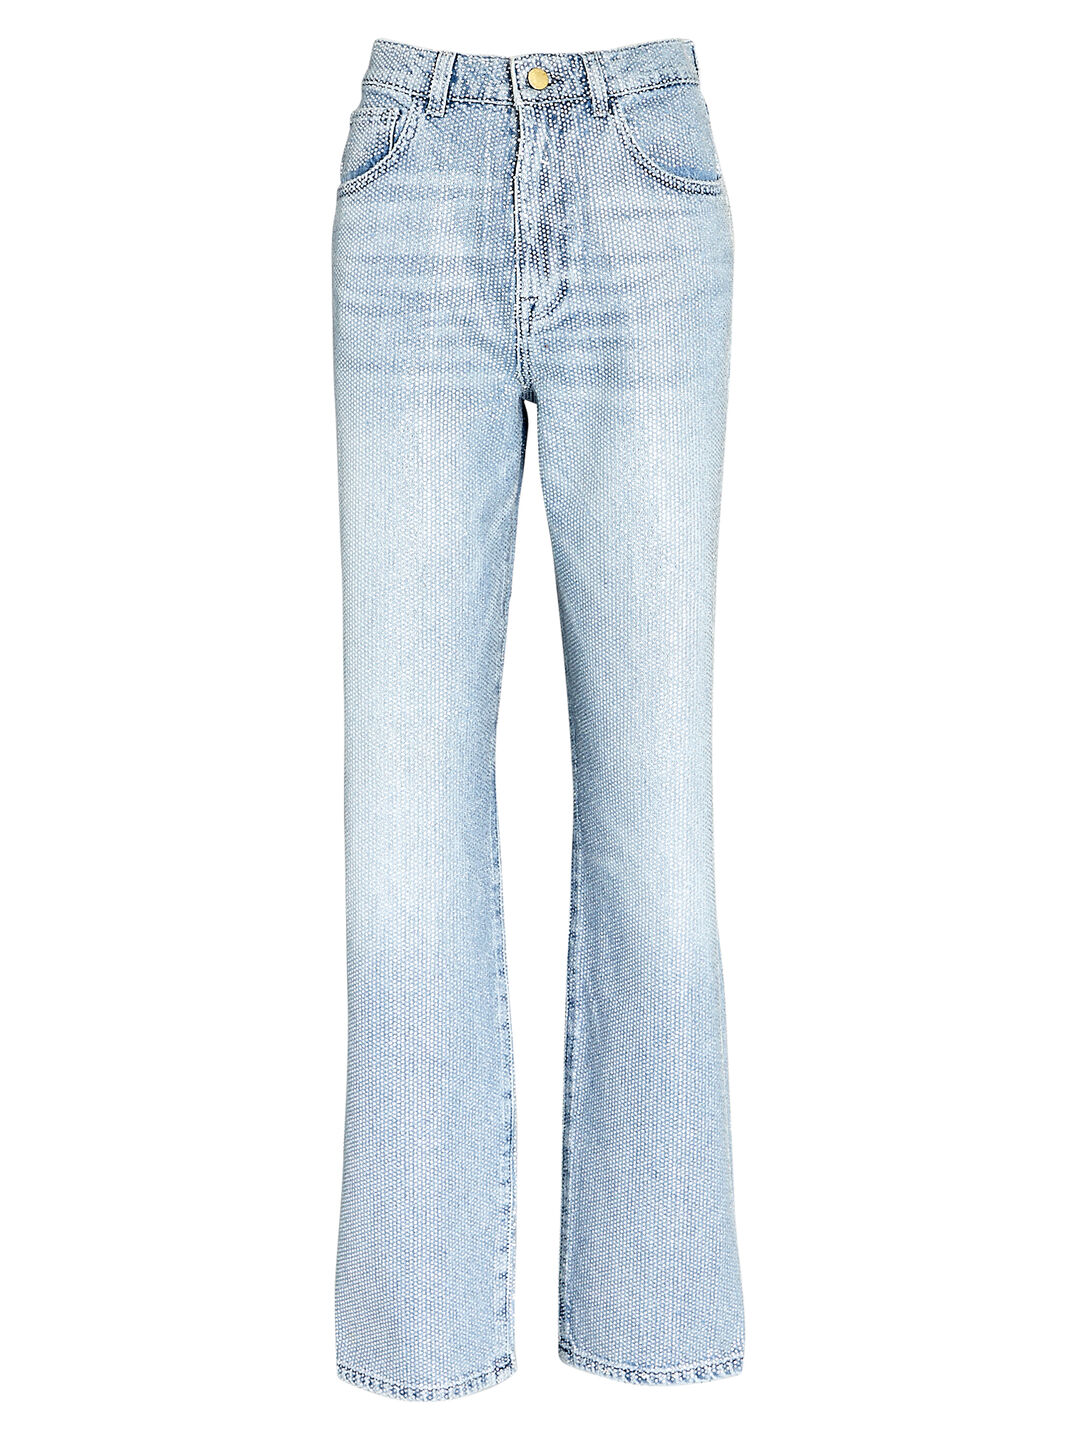 Ms. Keaton Crystal-Embellished Baggy Jeans